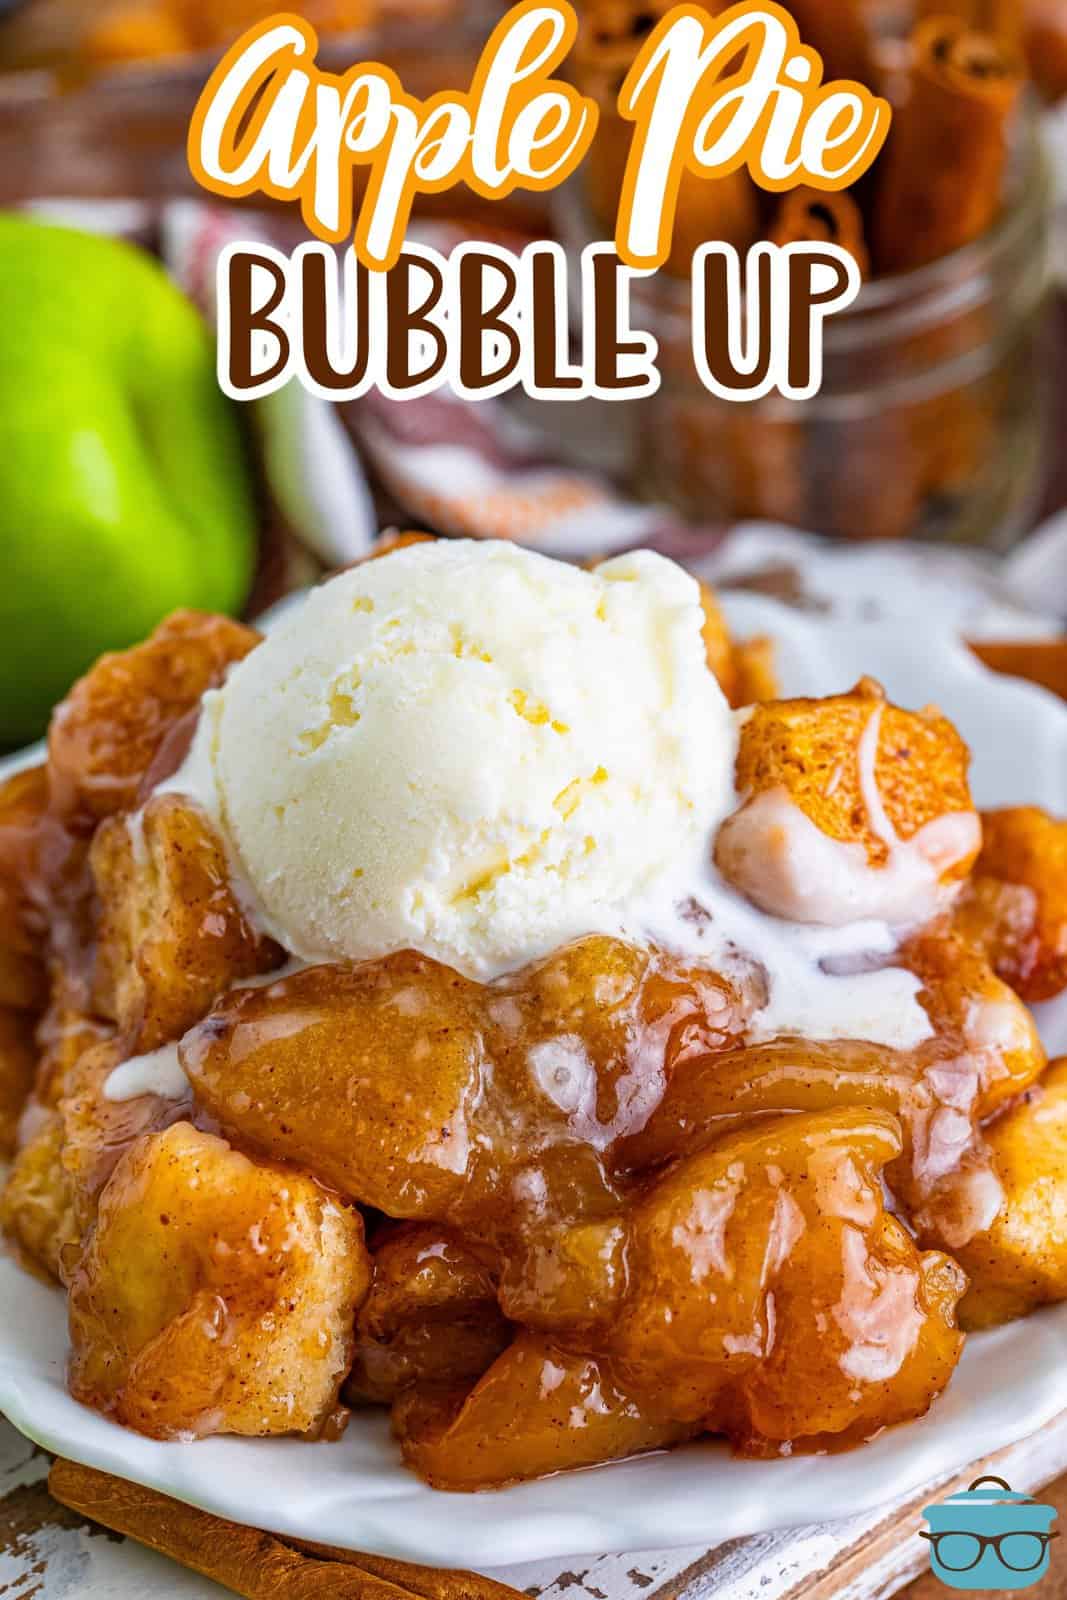 A scoop of ice cream on top of a dessert dish of Apple Pie Bubble Up.